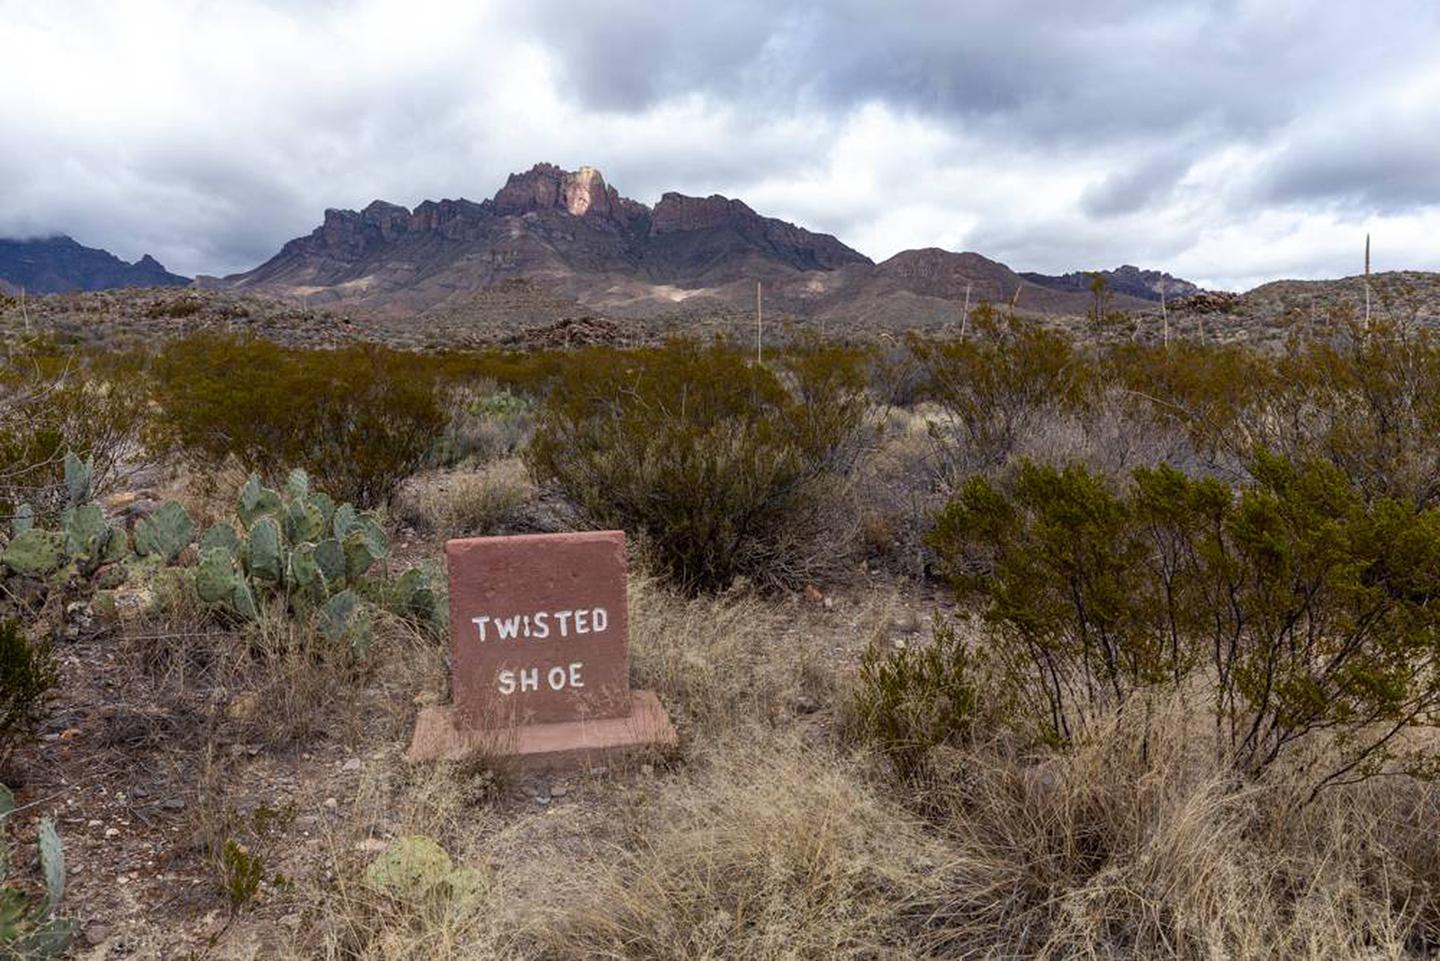 Campsite signsign along the Juniper Canyon Road indicating the turnoff to the Twisted Shoe campsite.